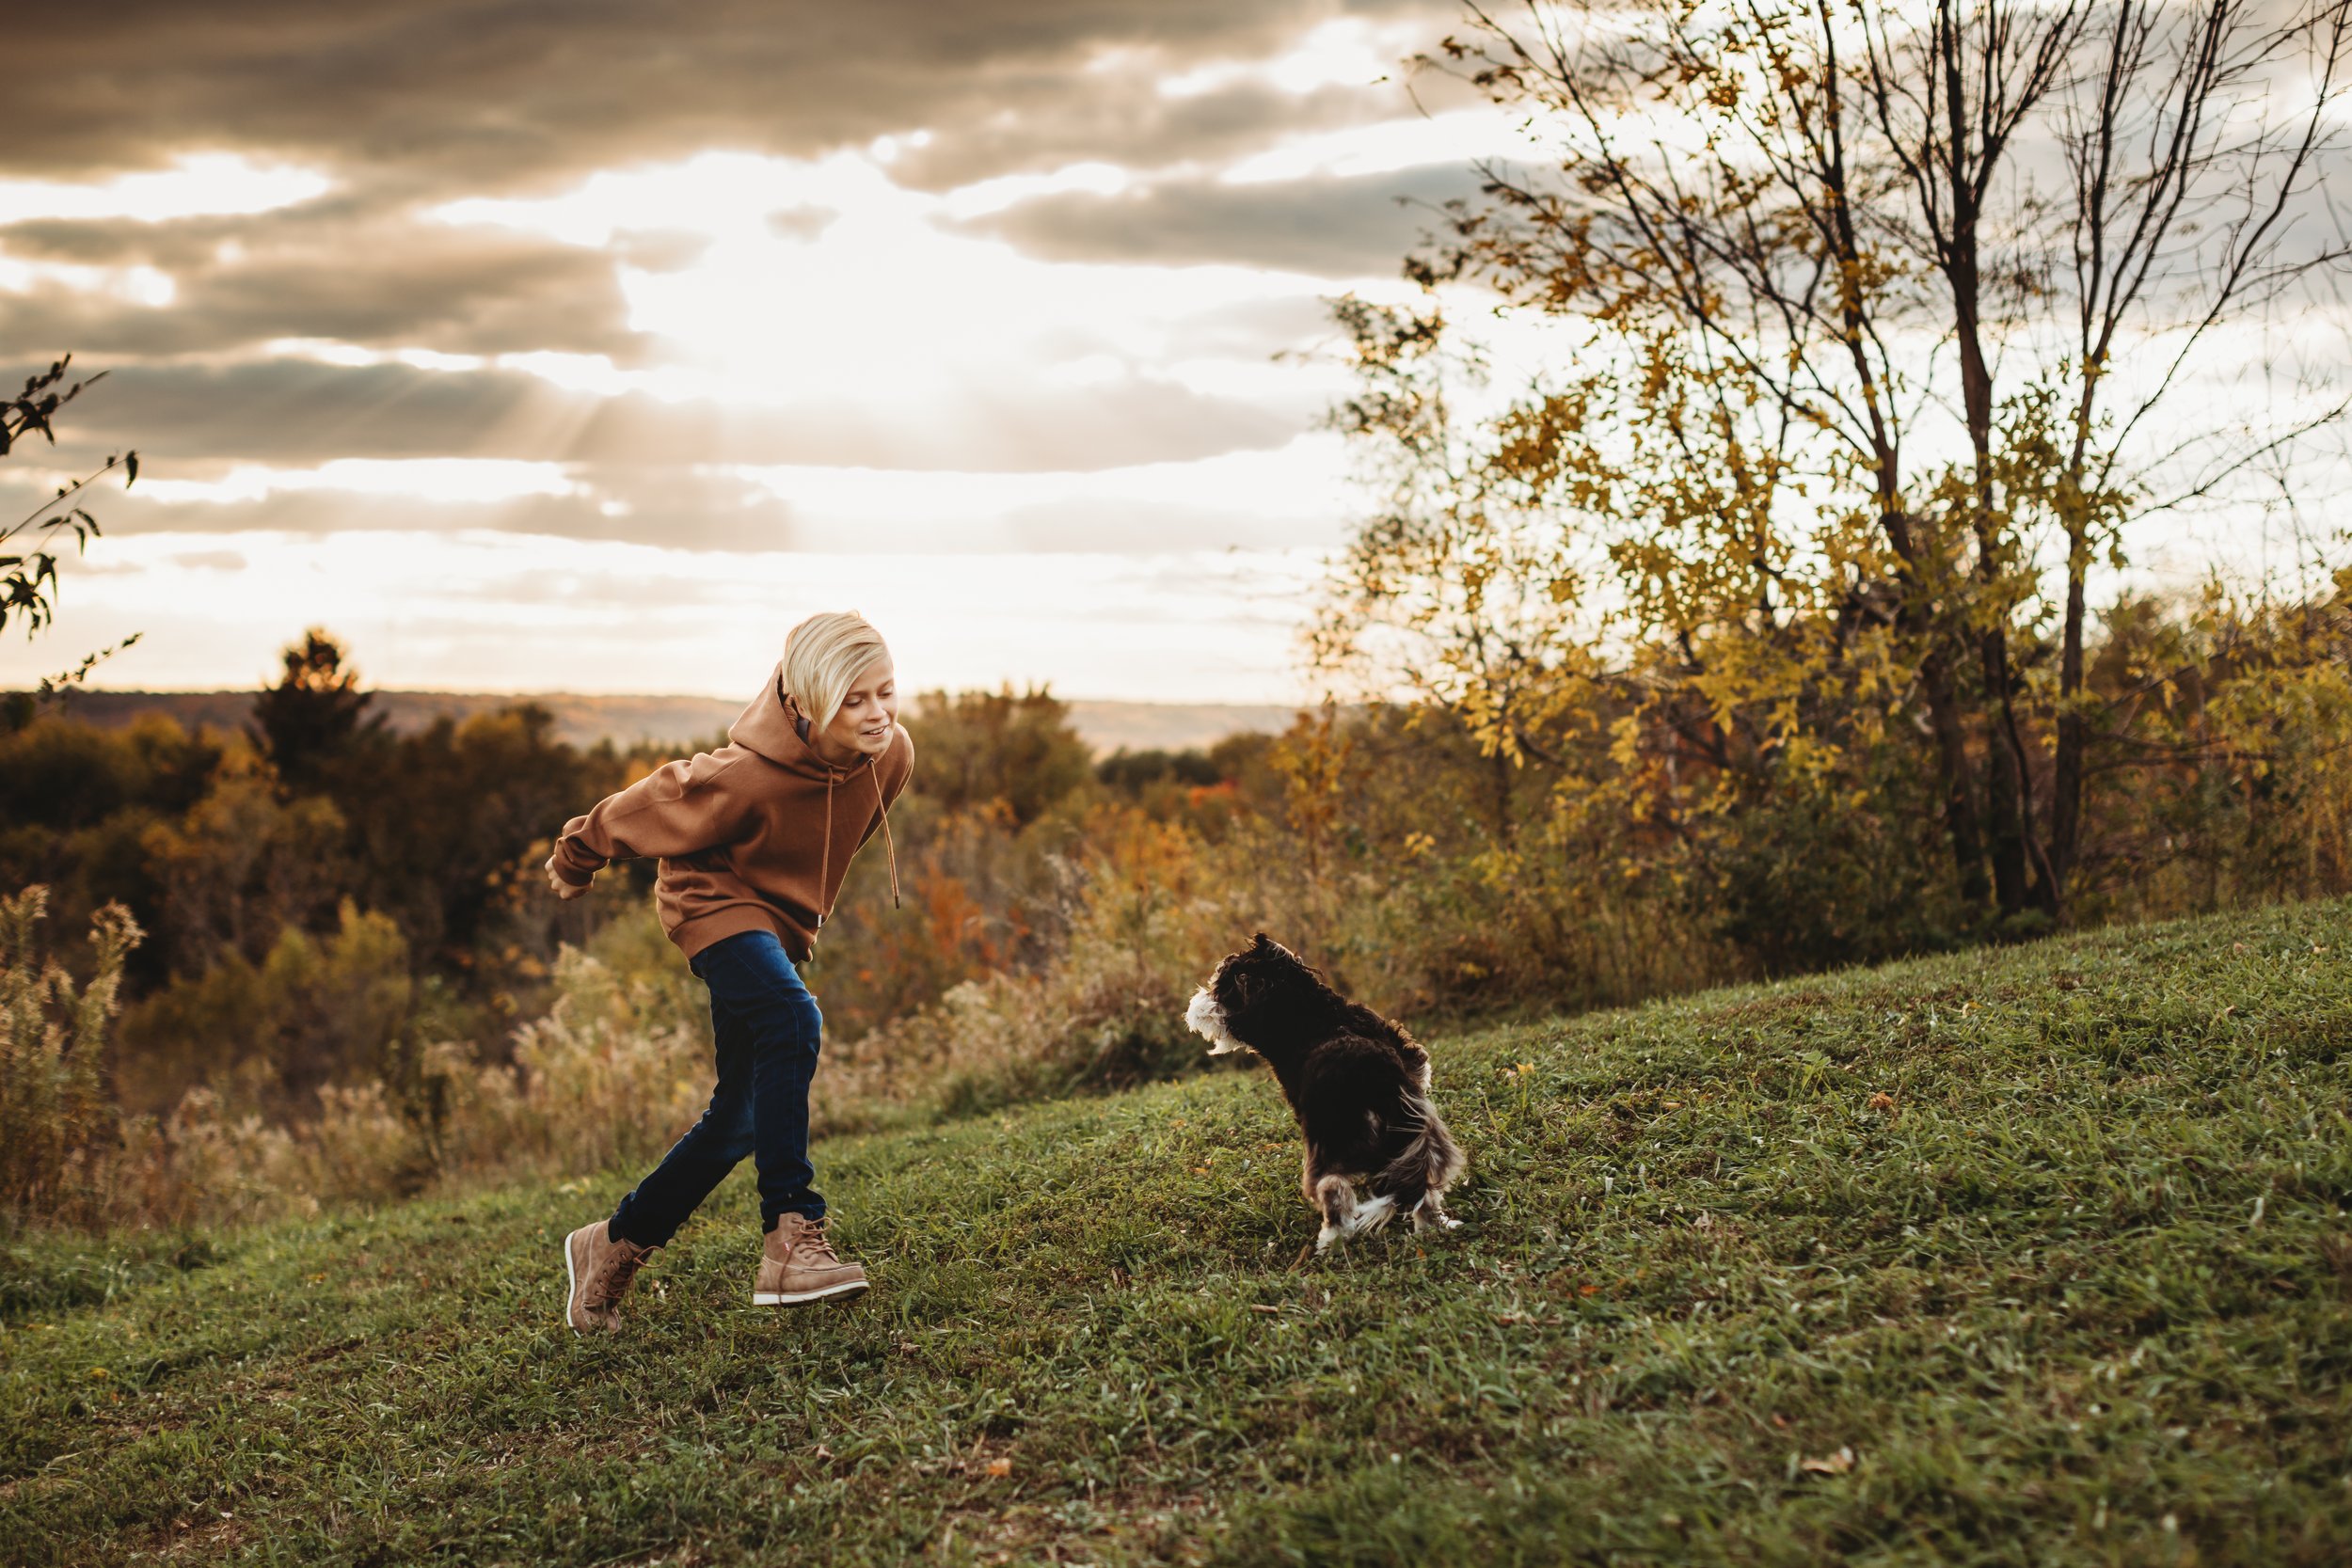  A young boy runs around a grass hill with his dog in Spring Valley, IL captured by Teala Ward Photography. Spring Valley Photog #tealawardphotography #tealawardfamilies #springvalleyillinois #springvalleyphotographers #Illinoisfamilyphotographer 